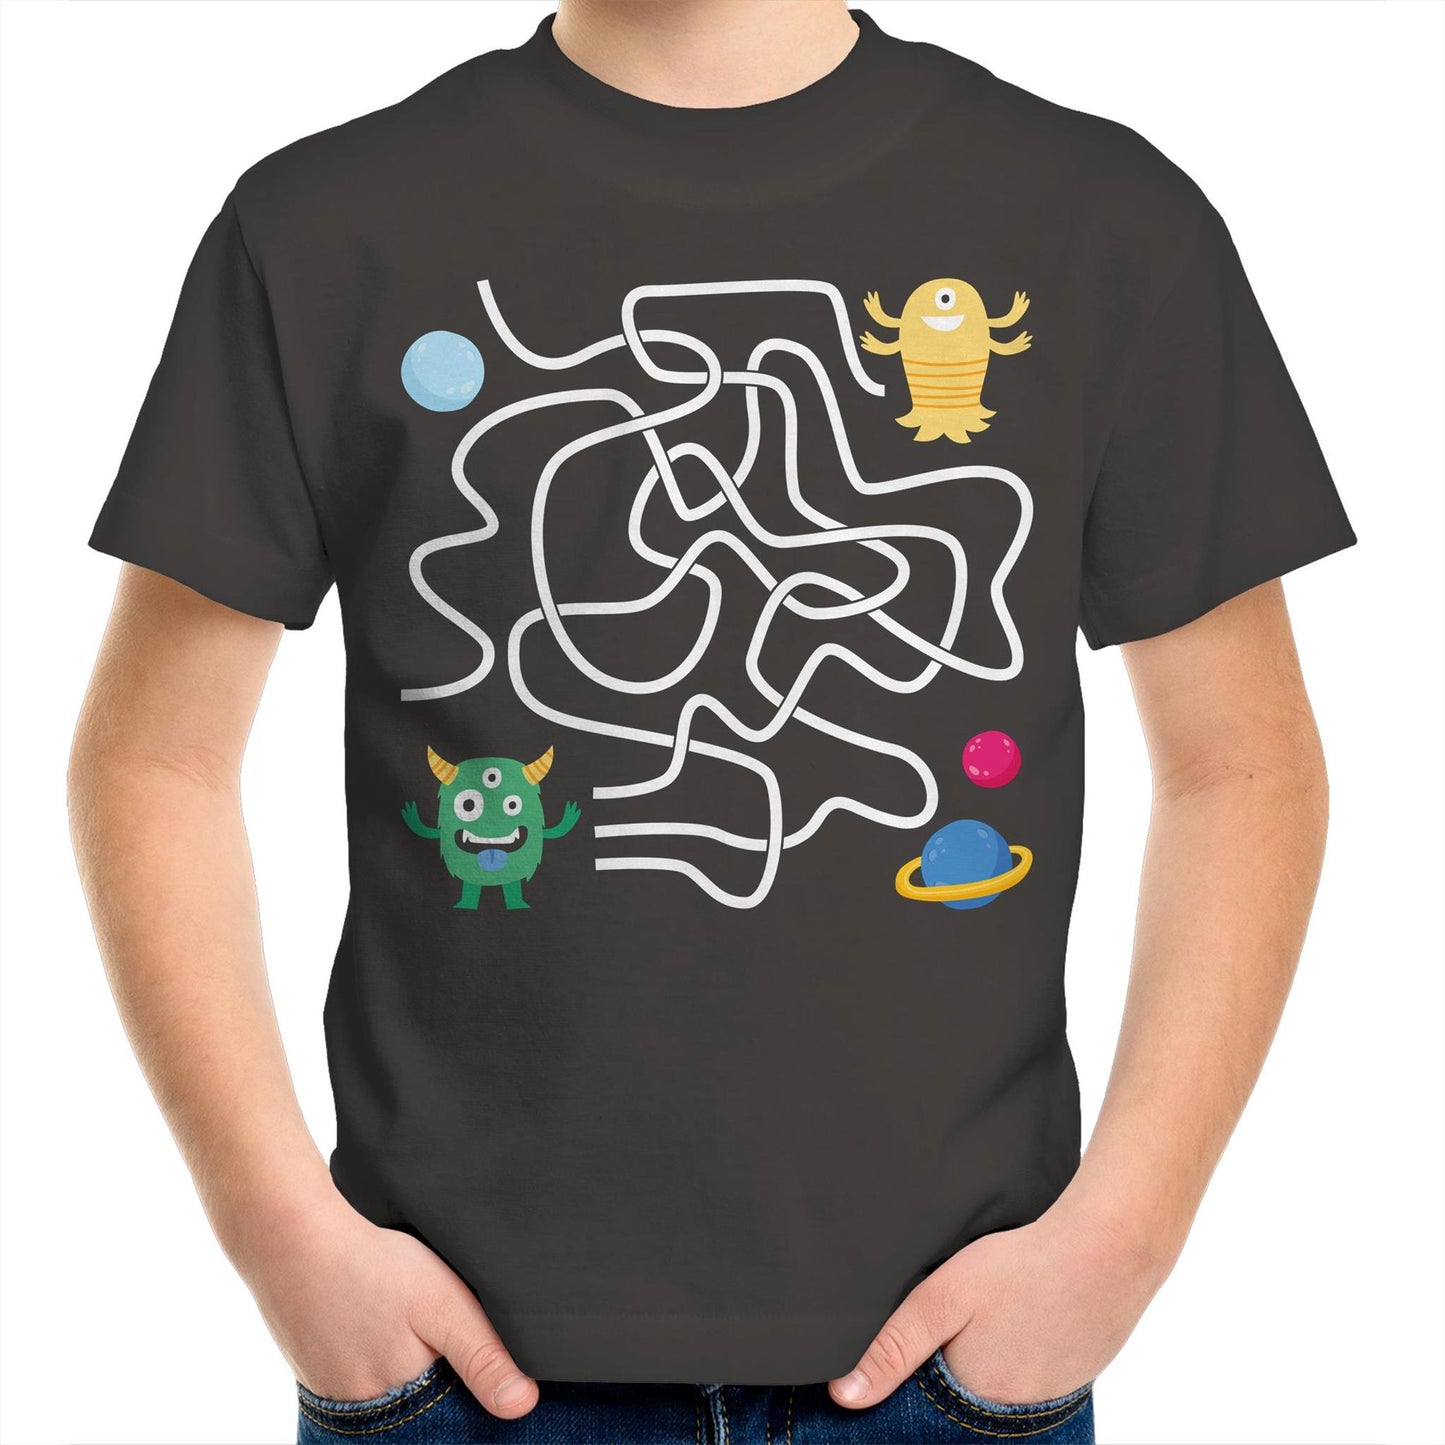 Find The Right Path, Space Alien - Kids Youth T-Shirt Charcoal Kids Youth T-shirt Sci Fi Space